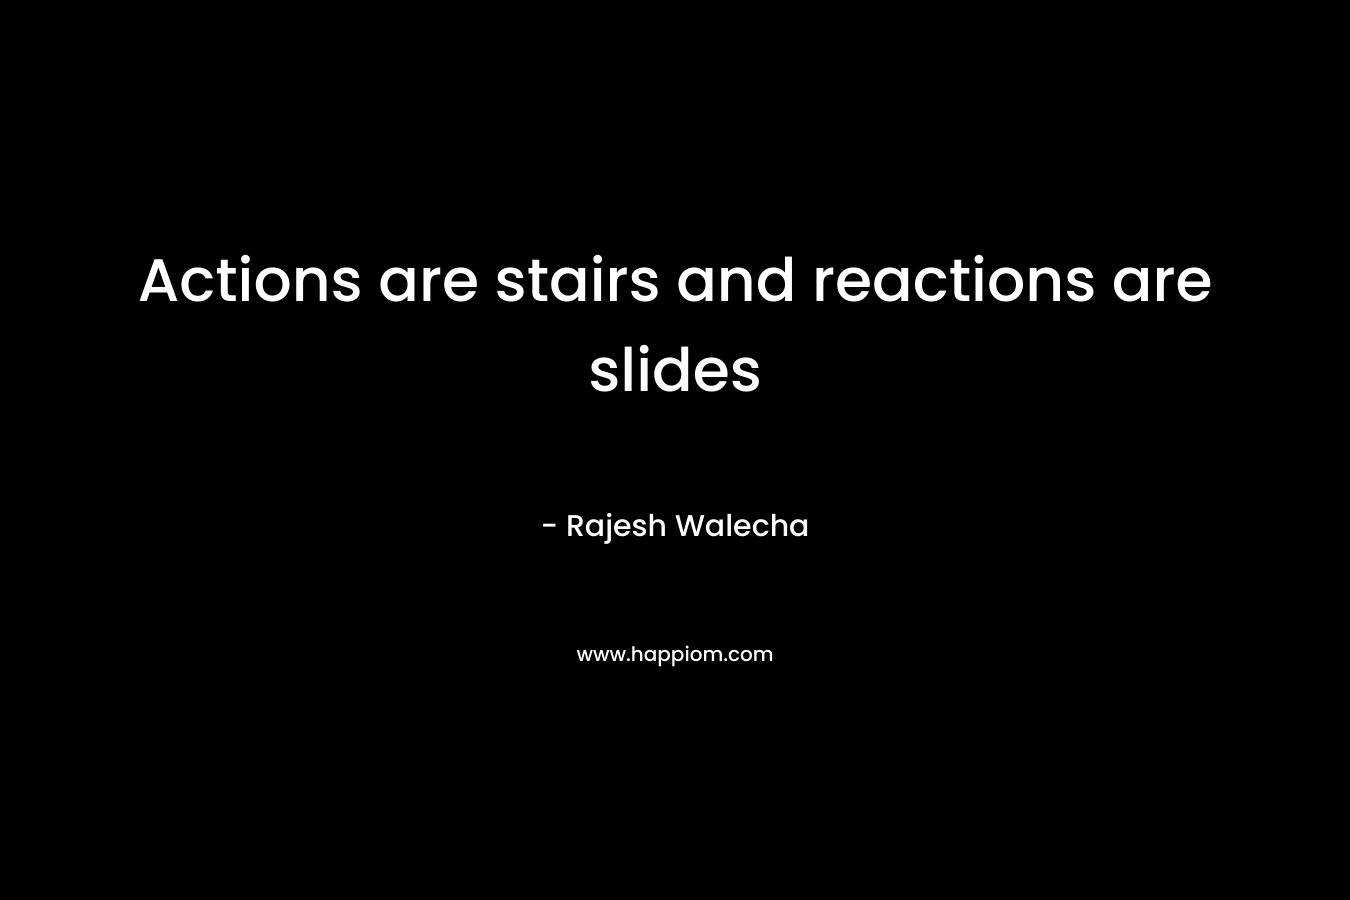 Actions are stairs and reactions are slides